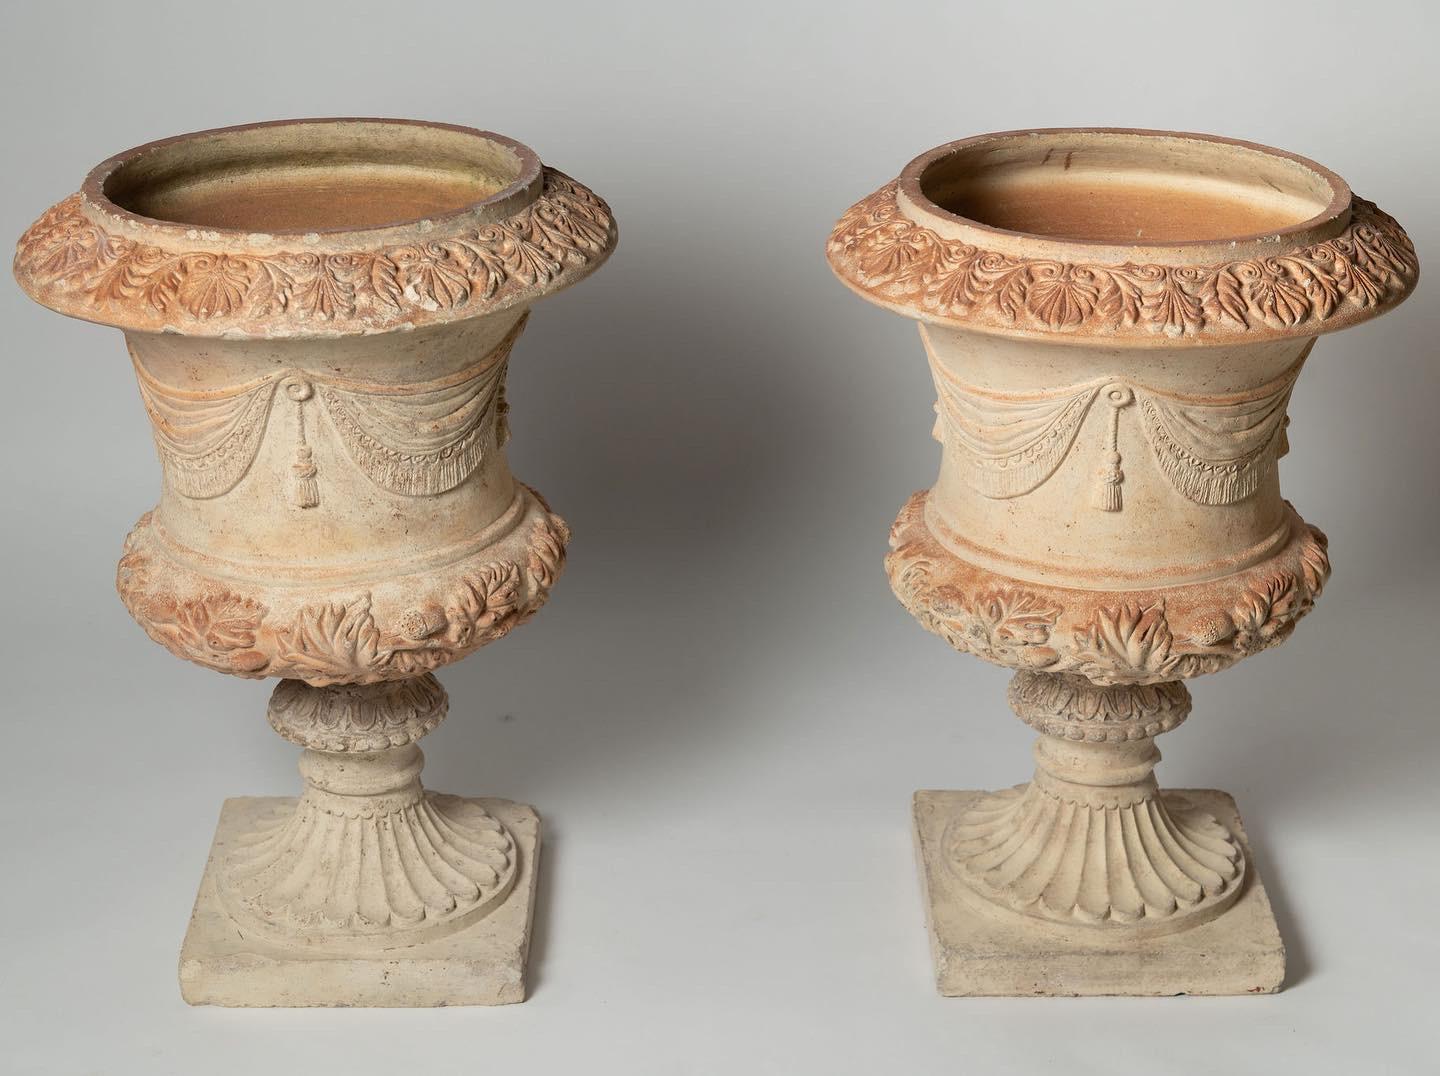 A lovely pair of Italian terracotta urns, swags and acorns. Perfect for the home or garden. They are in two sections per urn. (Base and urn) Soft colour tones. The base is 11.5 inches x 11.5 inches. Age related wear, chips etc, no cracks or